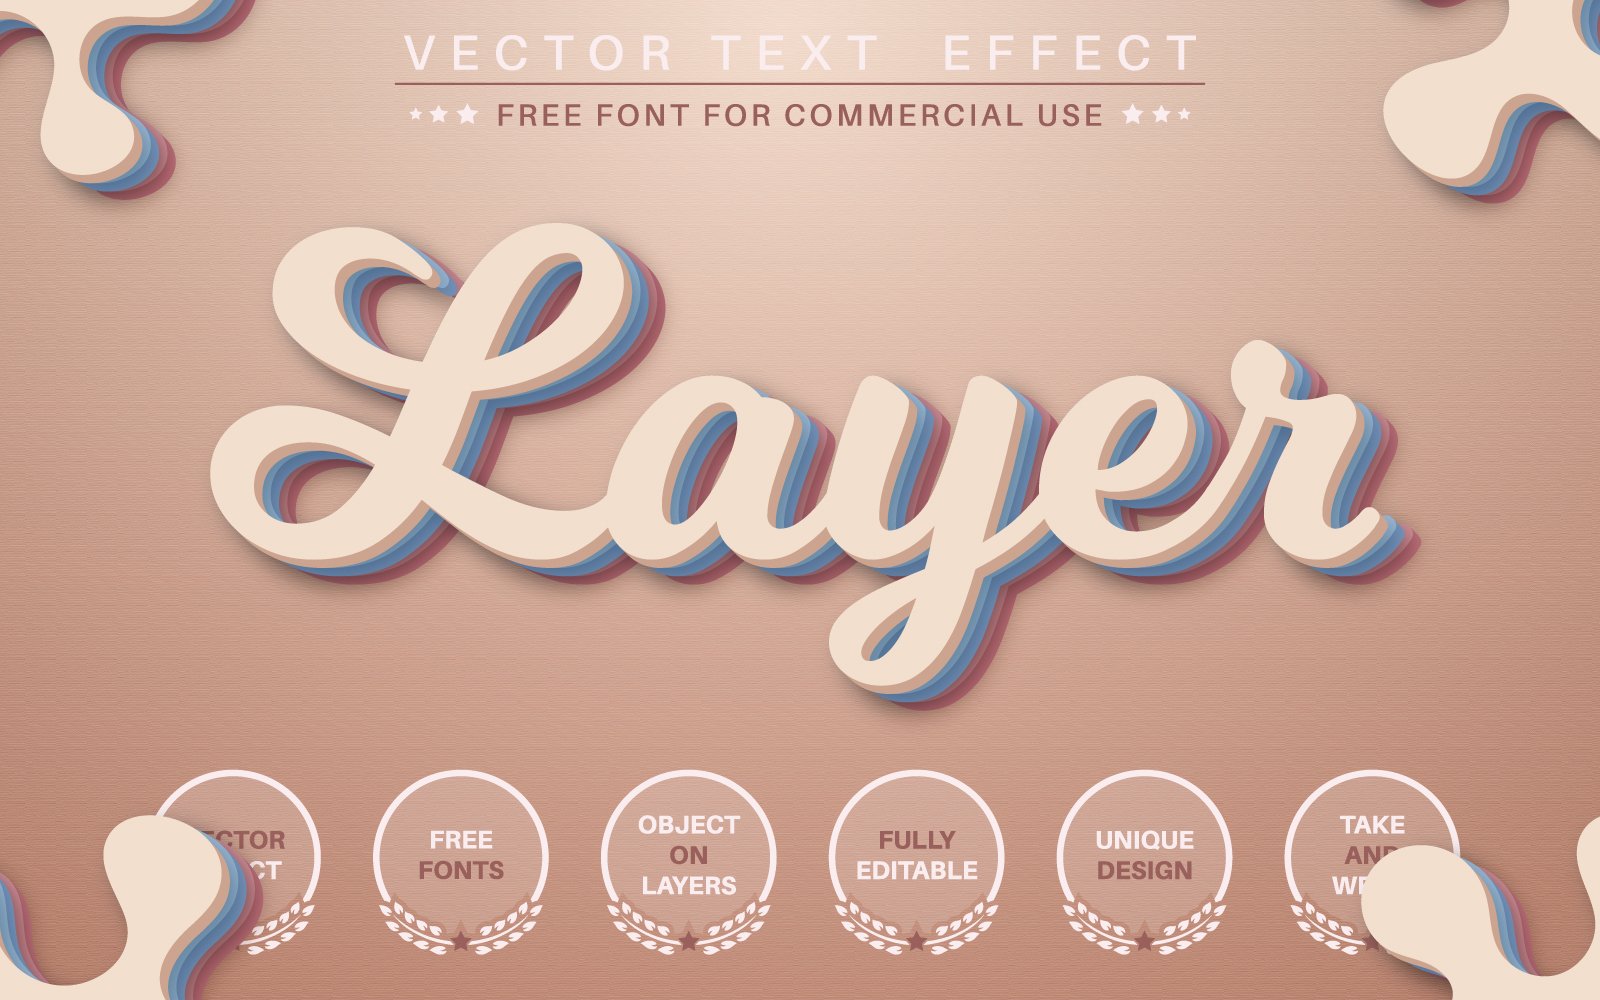 Layers - Editable Text Effect,  Font Style Graphic Illustration